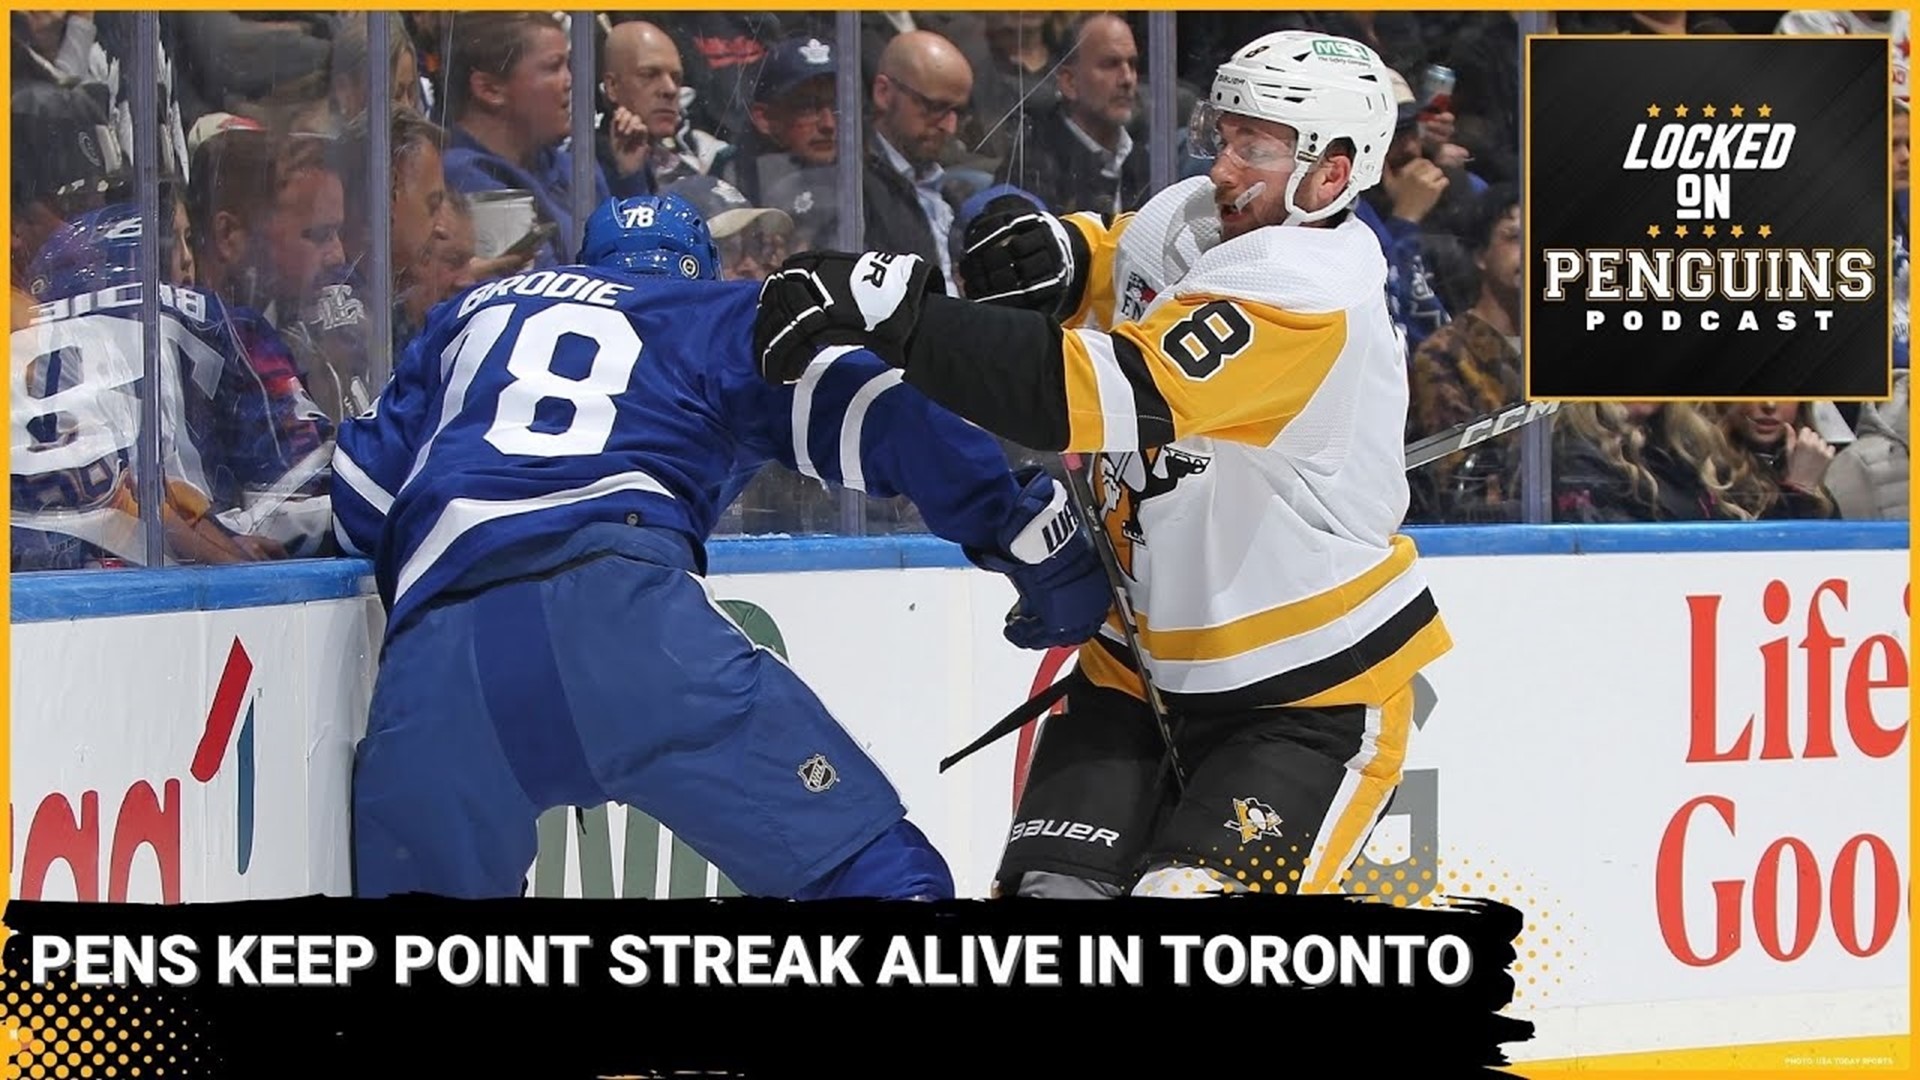 The Pittsburgh Penguins got a massive point against the Toronto Maple Leafs on Monday night and Hunter and Pat are here to discuss it.